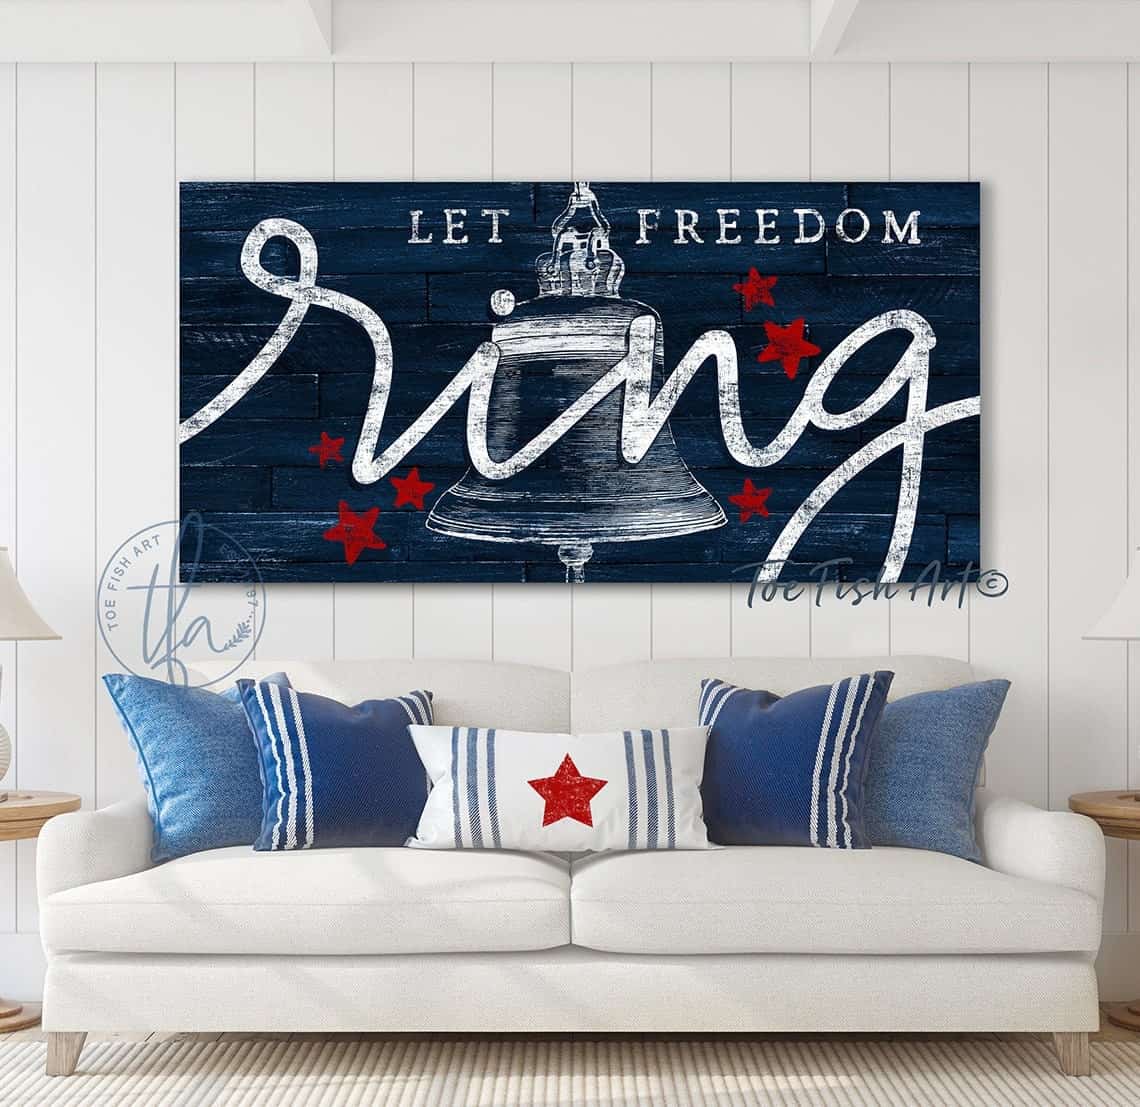 Let Freedom Ring Sign handmade by ToeFishArt. Original, custom, personalized wall decor signs. Canvas, Wood or Metal. Rustic modern farmhouse, cottagecore, vintage, retro, industrial, Americana, primitive, country, coastal, minimalist.